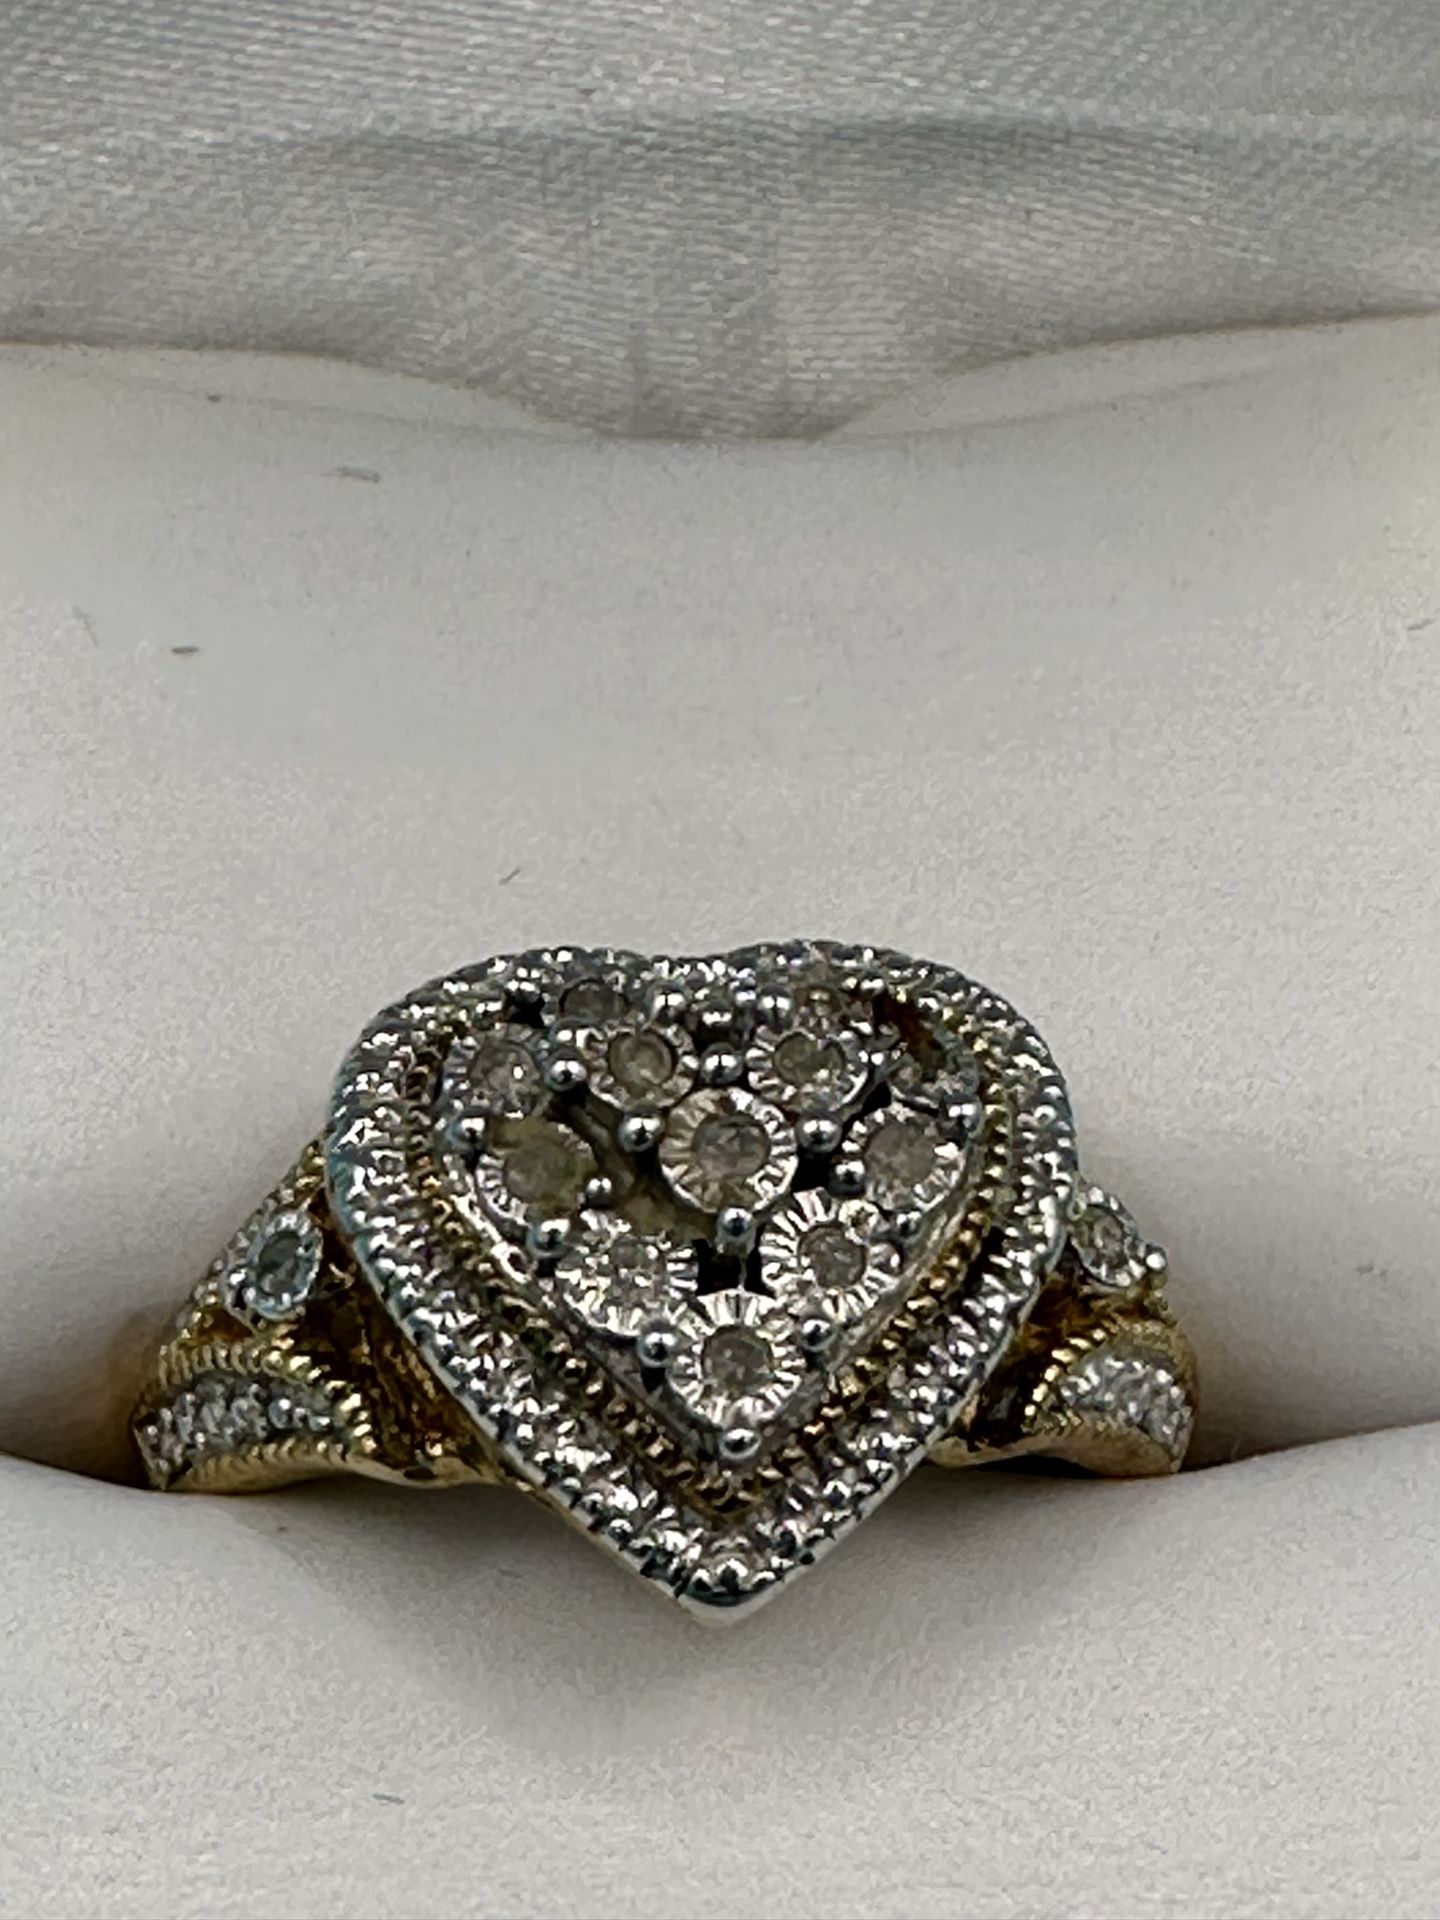 New Diamond 14KT Over Sterling Silver Heart Cluster Ring Size 6.75 And Weighs 4.00 Grams Beautiful 